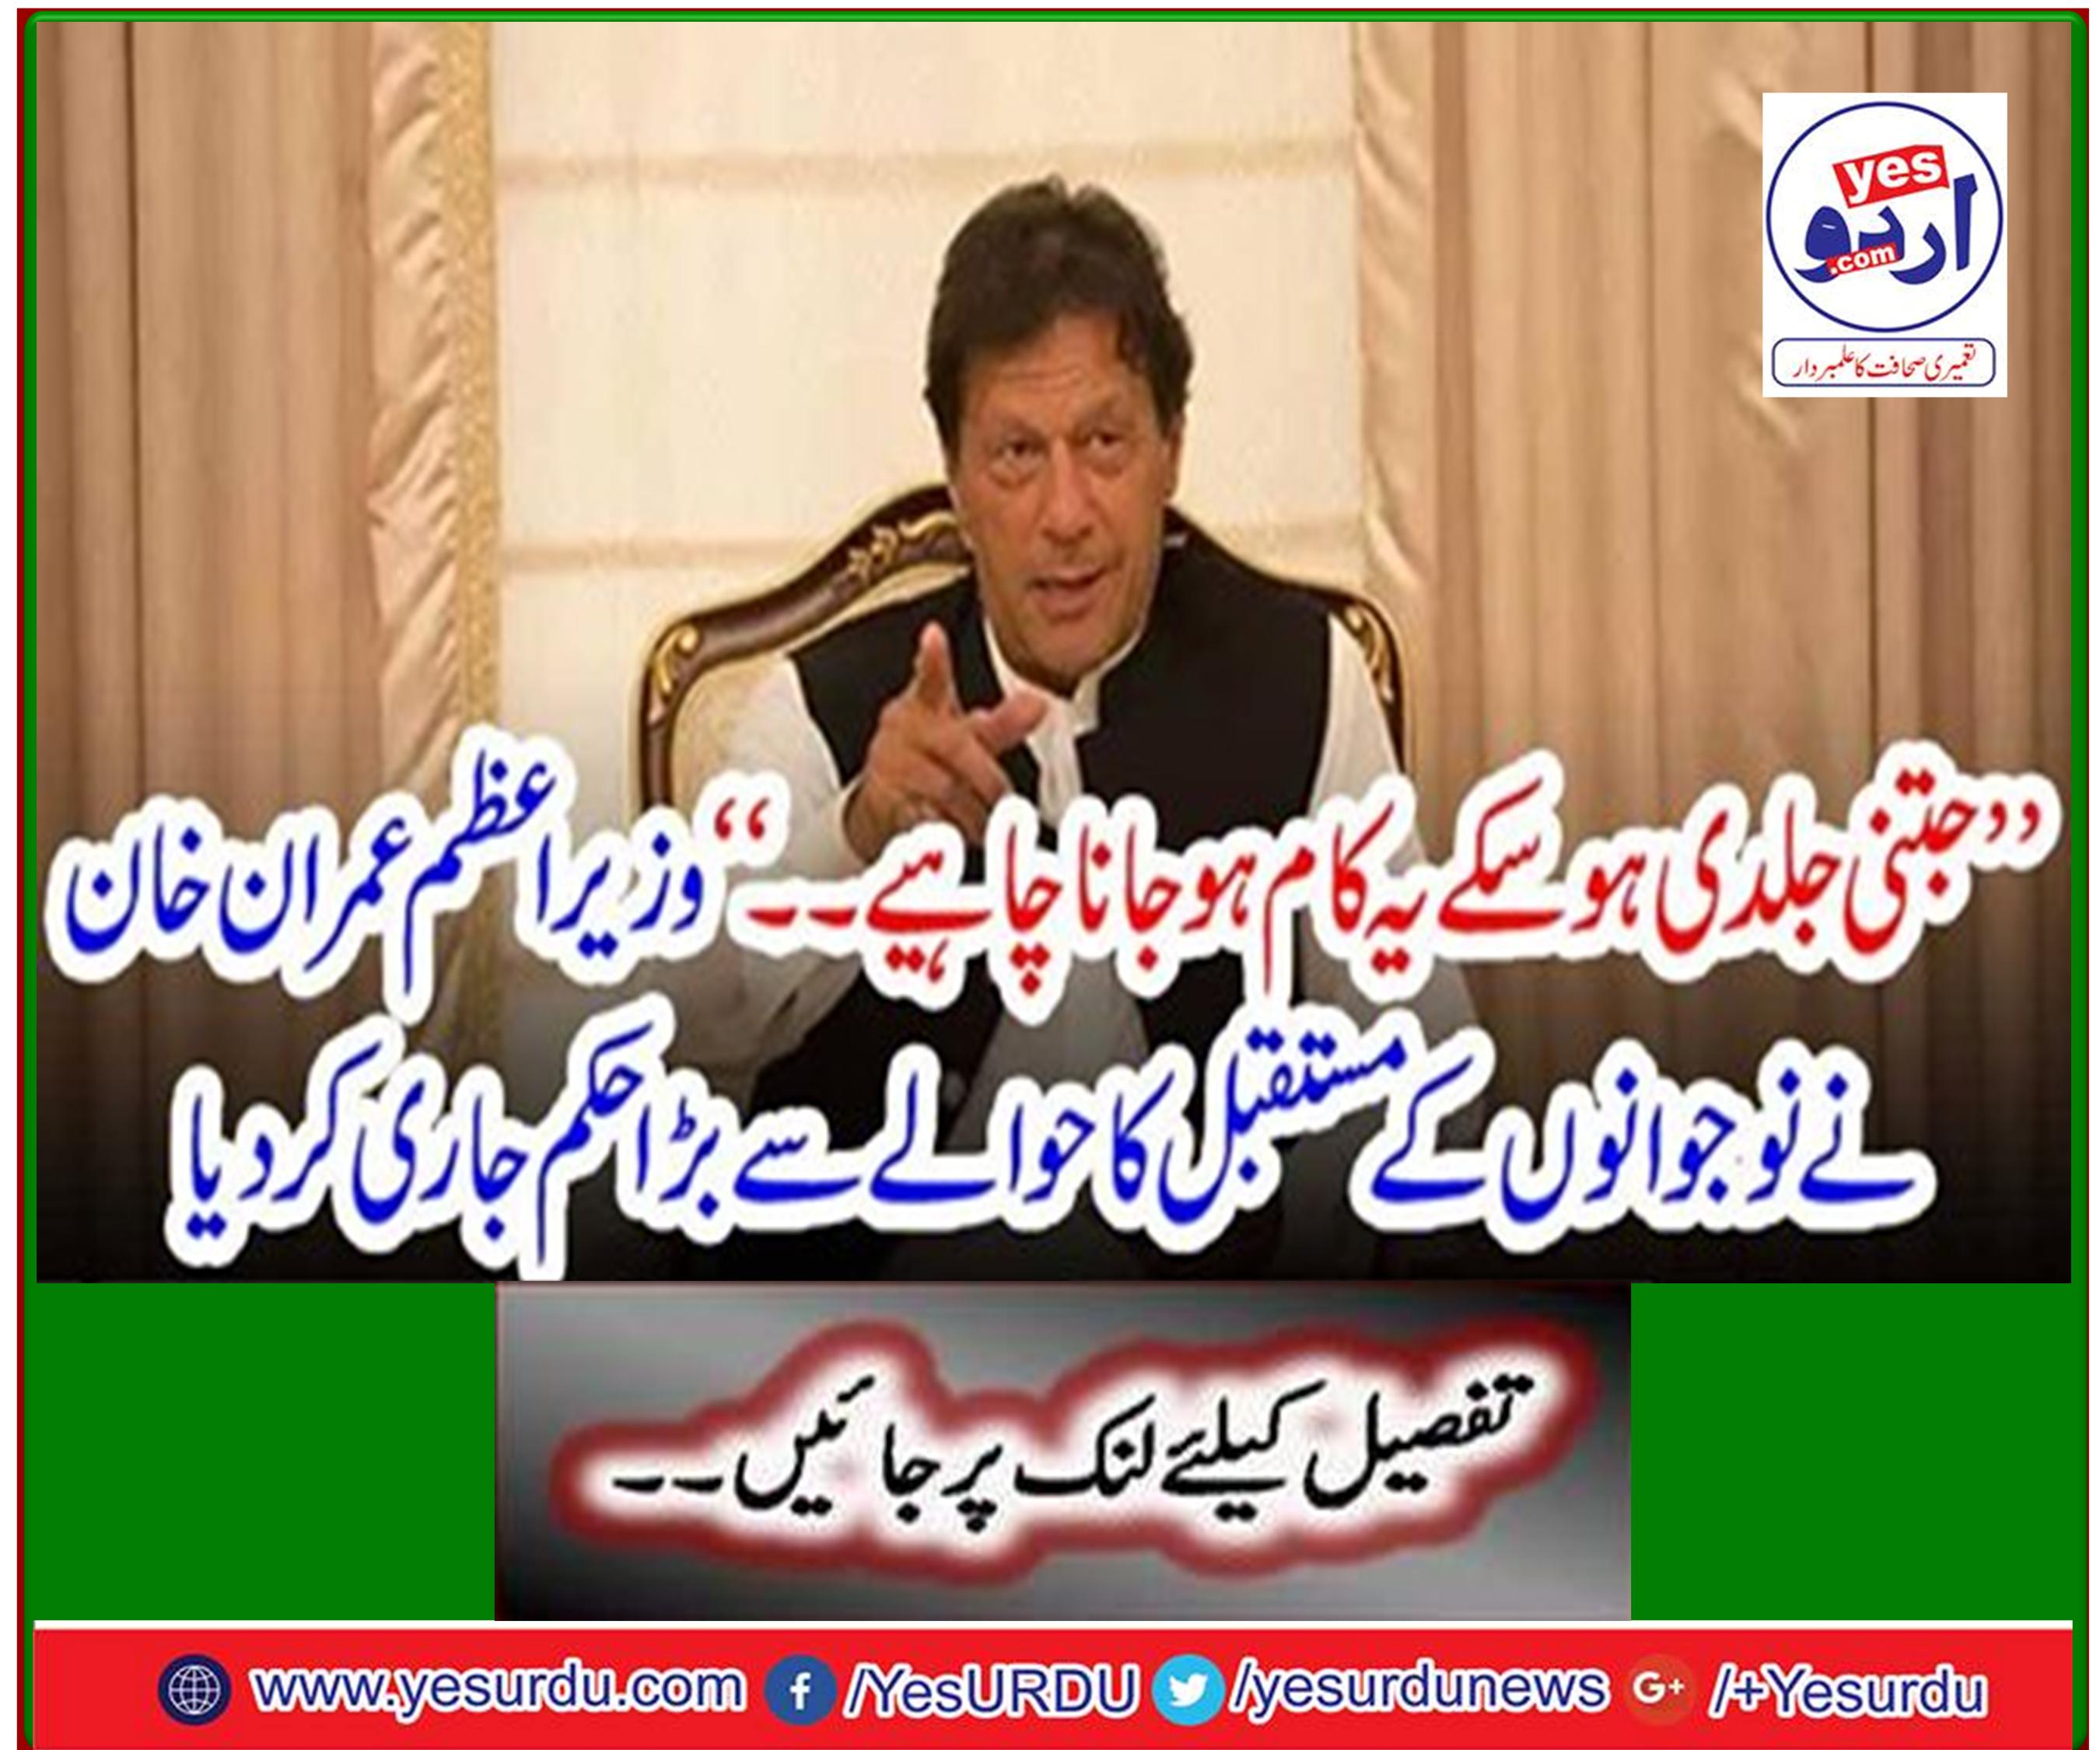 Prime Minister Imran Khan has issued a big order regarding the future of youth